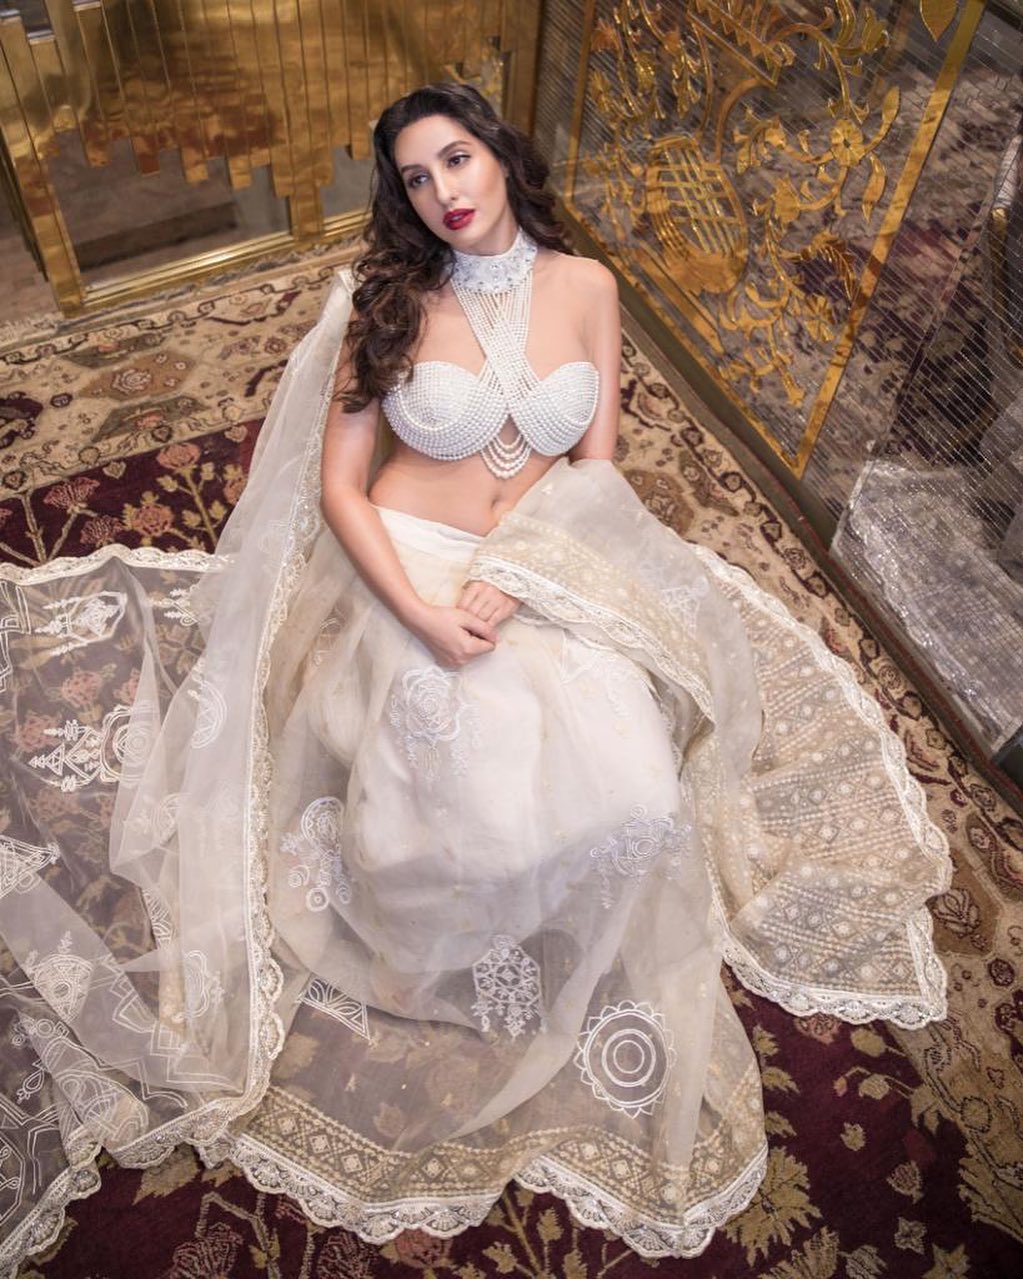 Nora Fatehi Looks Mesmerizing in Gorgeous Indian Outfit, See Pics